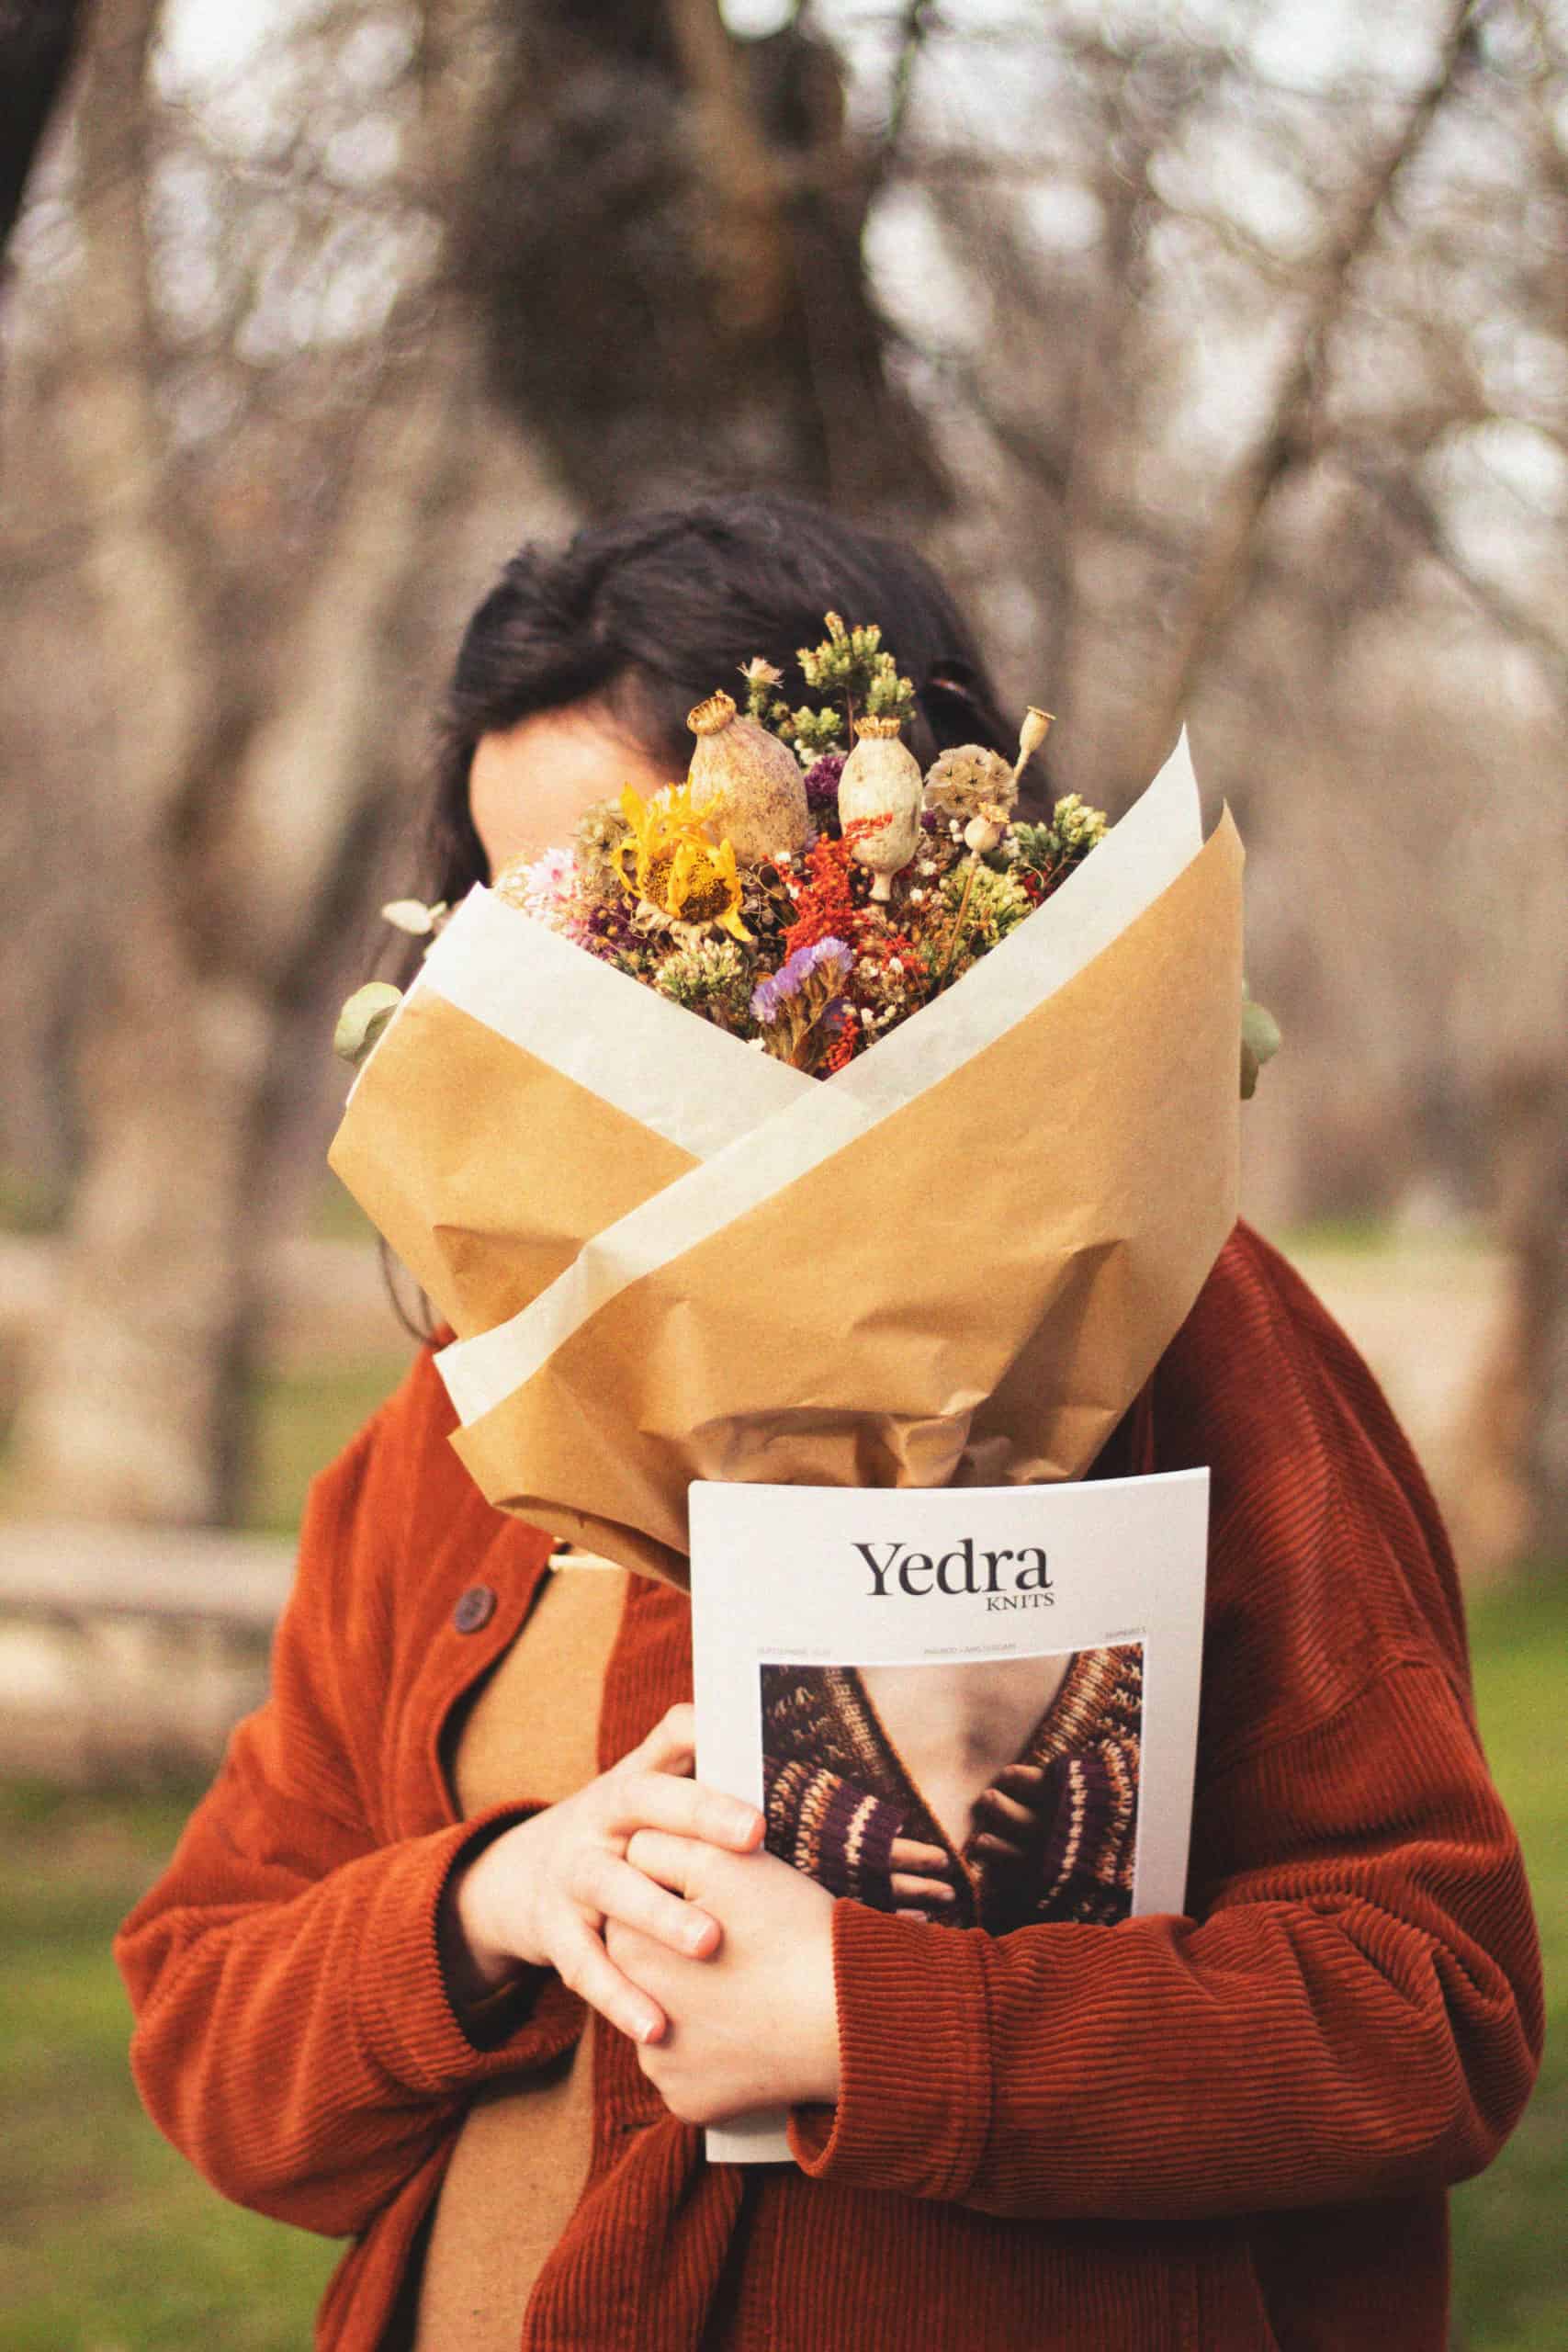 A person in an orange coat holding a bouquet of flowers in front of their face and a magazine called Yedra.